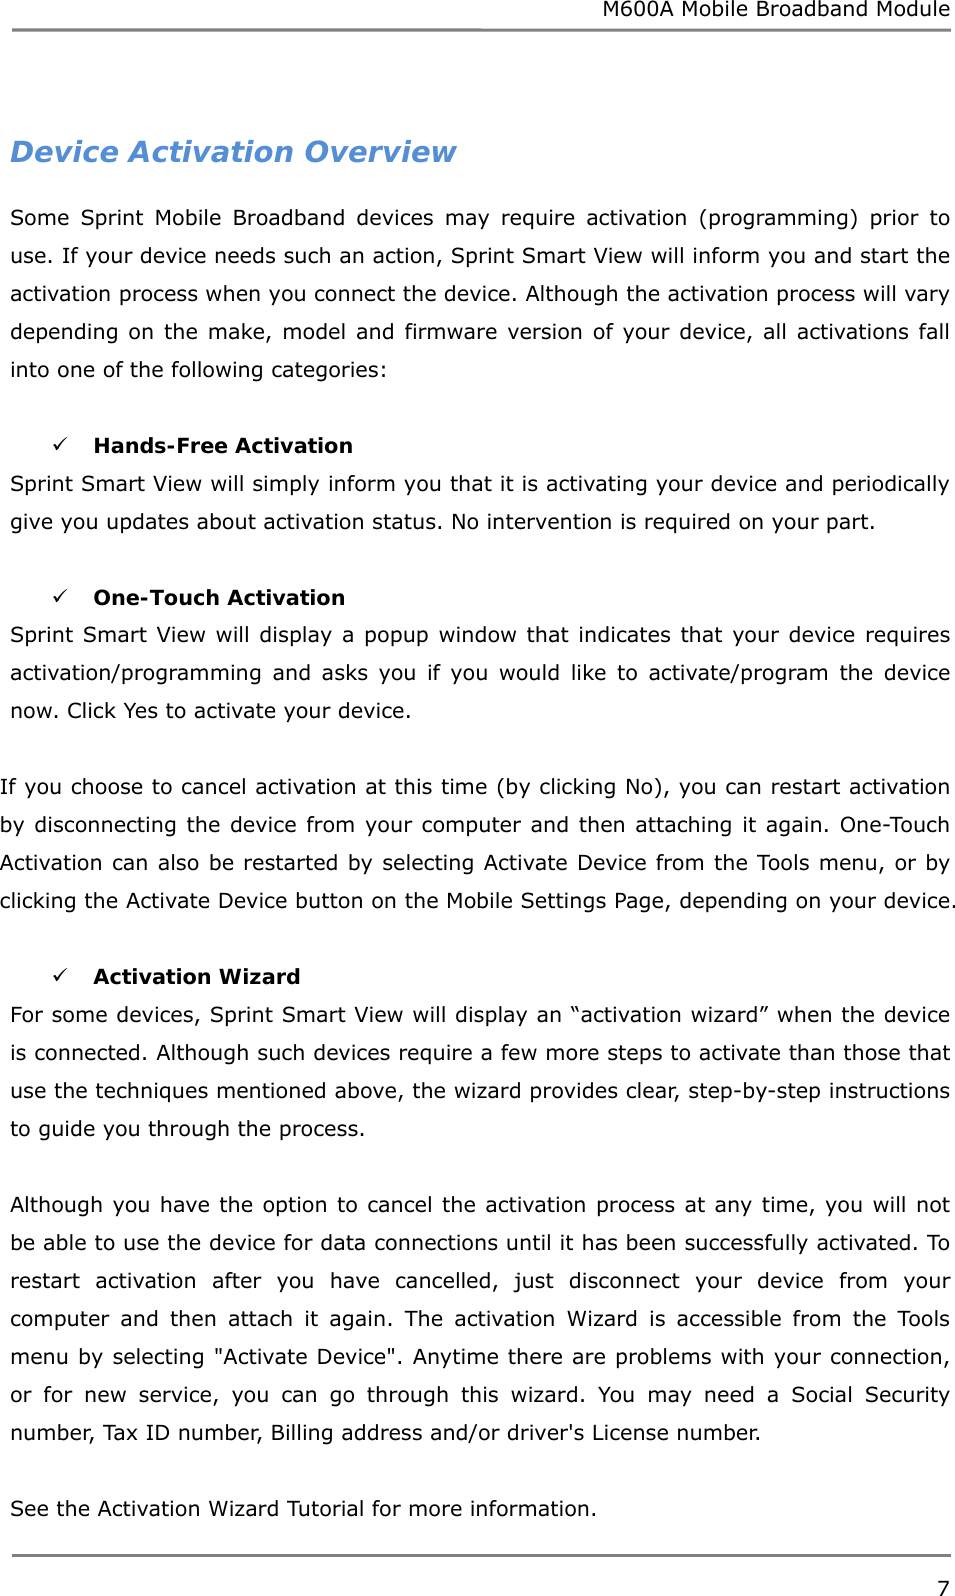 M600A Mobile Broadband Module  Device Activation Overview Some Sprint Mobile Broadband devices may require activation (programming) prior to use. If your device needs such an action, Sprint Smart View will inform you and start the activation process when you connect the device. Although the activation process will vary depending on the make, model and firmware version of your device, all activations fall into one of the following categories:   Hands-Free Activation  Sprint Smart View will simply inform you that it is activating your device and periodically give you updates about activation status. No intervention is required on your part.   One-Touch Activation  Sprint Smart View will display a popup window that indicates that your device requires activation/programming and asks you if you would like to activate/program the device now. Click Yes to activate your device.  If you choose to cancel activation at this time (by clicking No), you can restart activation by disconnecting the device from your computer and then attaching it again. One-Touch Activation can also be restarted by selecting Activate Device from the Tools menu, or by clicking the Activate Device button on the Mobile Settings Page, depending on your device.   Activation Wizard For some devices, Sprint Smart View will display an “activation wizard” when the device is connected. Although such devices require a few more steps to activate than those that use the techniques mentioned above, the wizard provides clear, step-by-step instructions to guide you through the process.  Although you have the option to cancel the activation process at any time, you will not be able to use the device for data connections until it has been successfully activated. To restart activation after you have cancelled, just disconnect your device from your computer and then attach it again. The activation Wizard is accessible from the Tools menu by selecting &quot;Activate Device&quot;. Anytime there are problems with your connection, or for new service, you can go through this wizard. You may need a Social Security number, Tax ID number, Billing address and/or driver&apos;s License number.  See the Activation Wizard Tutorial for more information. 7  